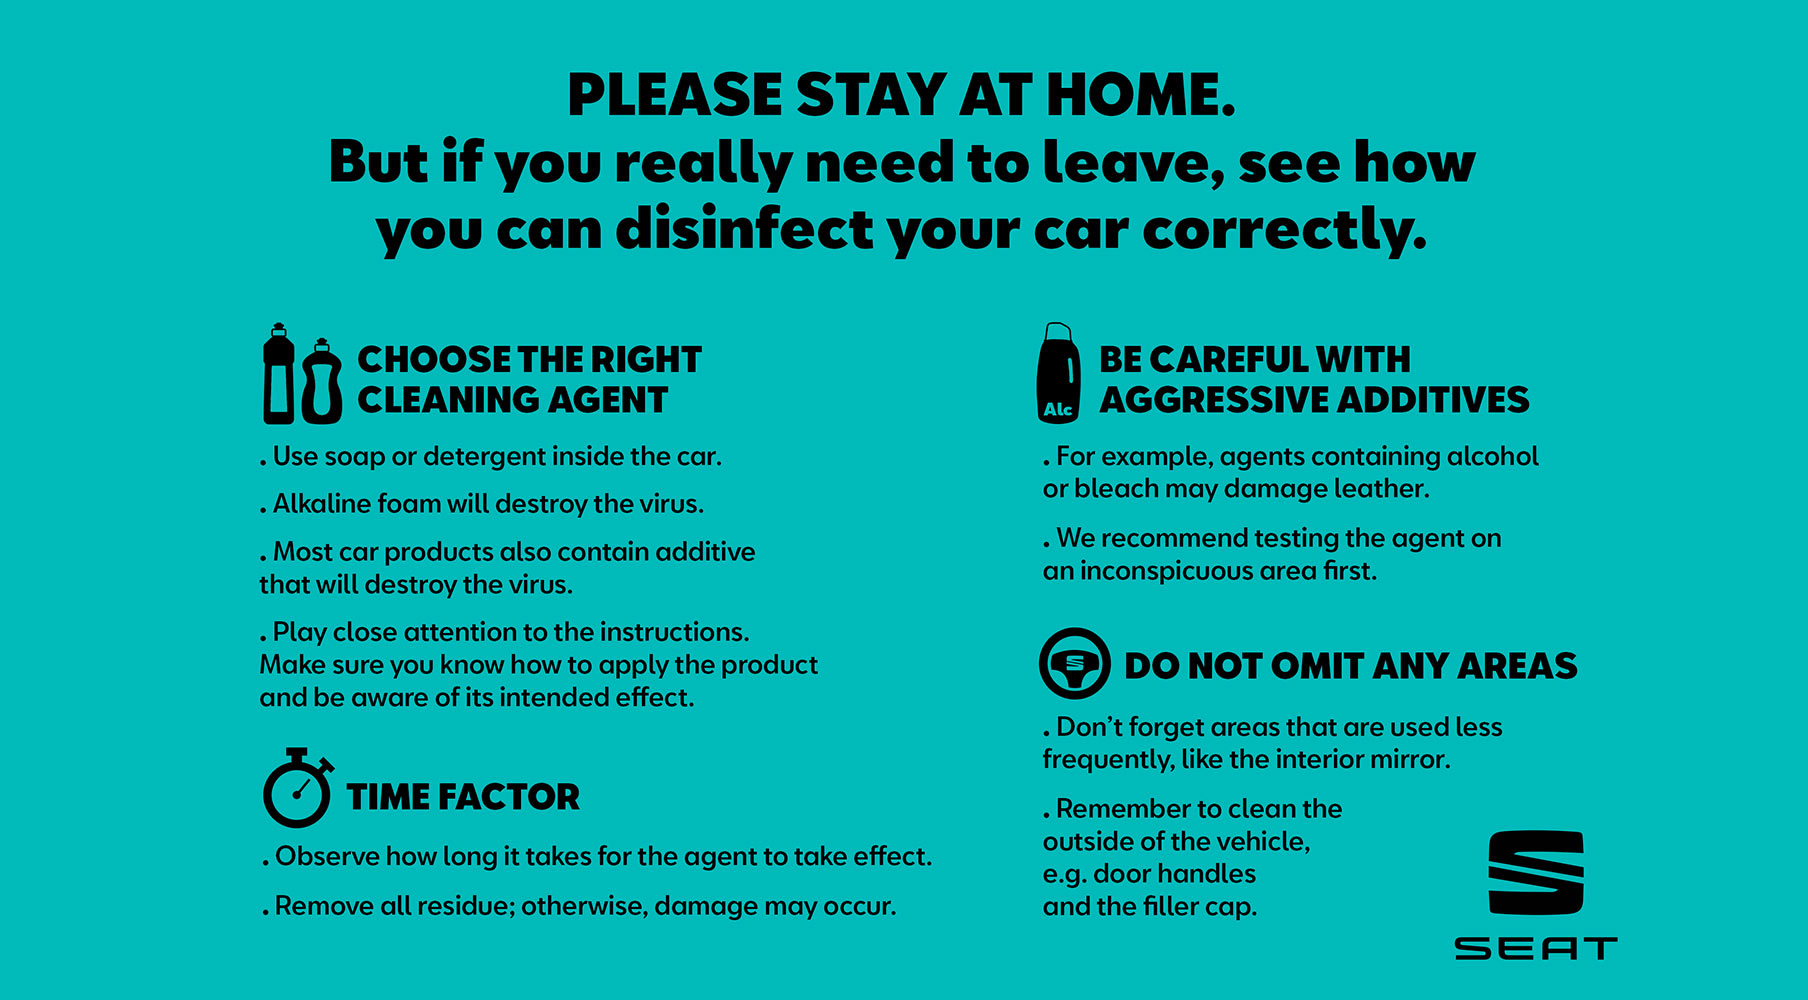 Tips to ready your car after lockdown.